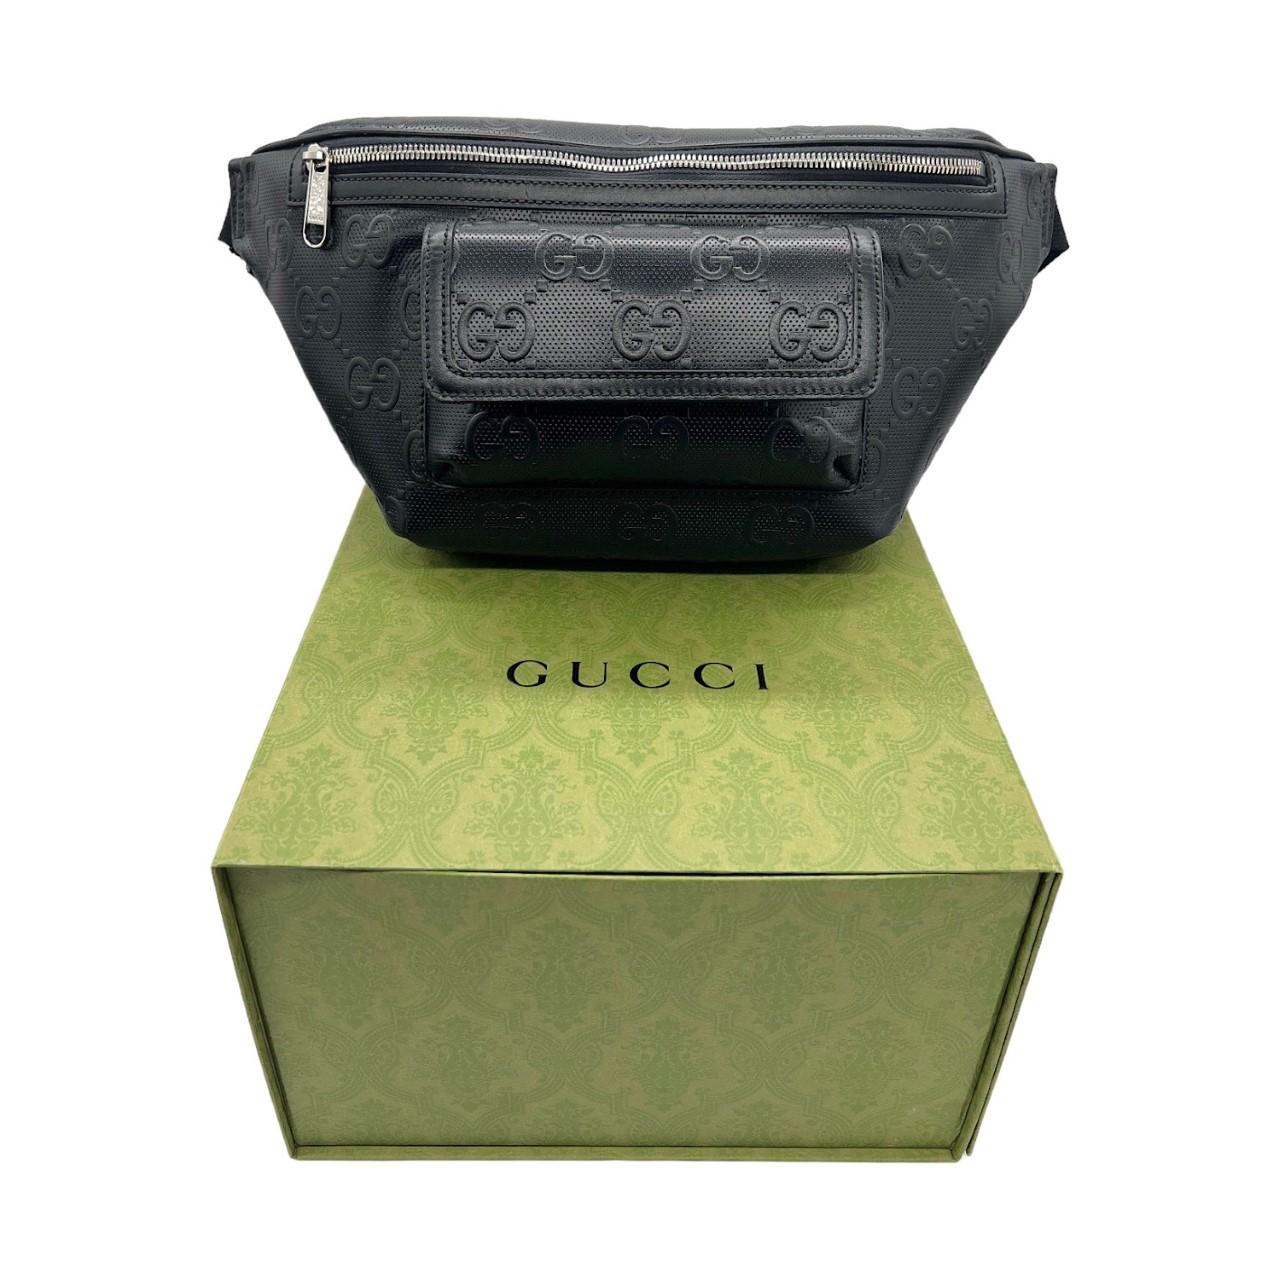 We are offering this very stylish Gucci 100 belt bag that connects the fashion house's past and present. It is finely crafted of a luxurious black leather base with Guccio Gucci's 'GG' monogram logo embossed all throughout the exterior. The bag